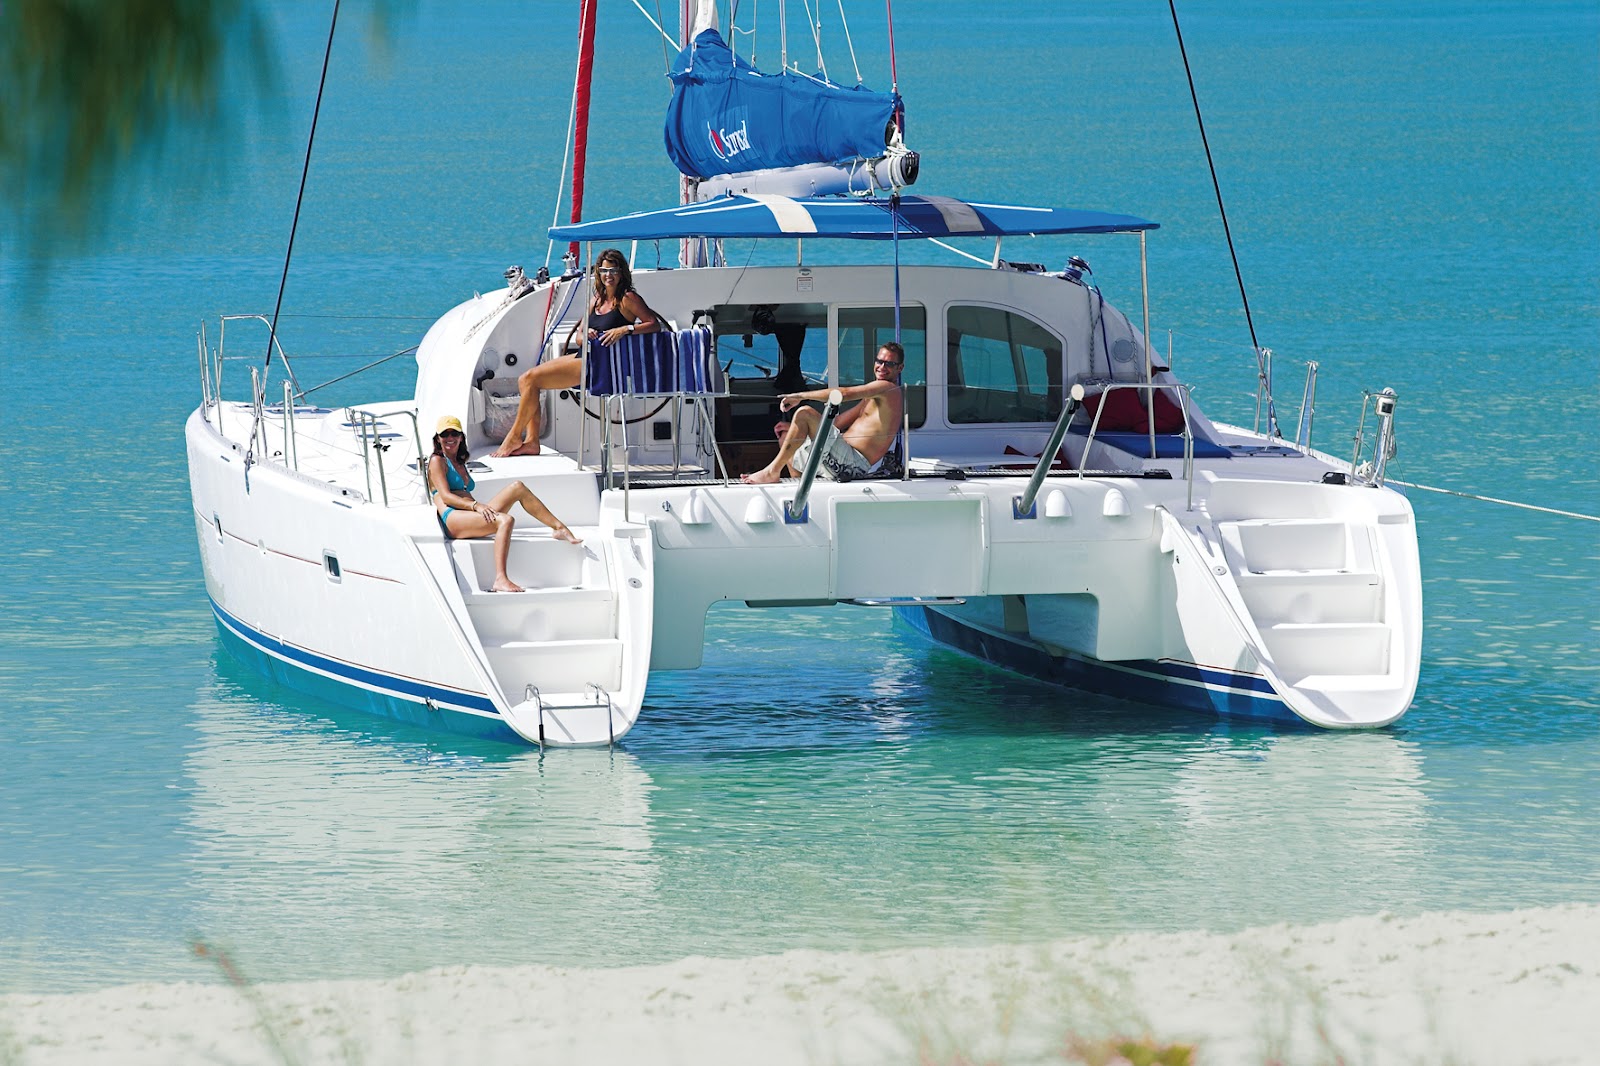 Sunlover Holidays: Hiring a Yacht in the Whitsundays 